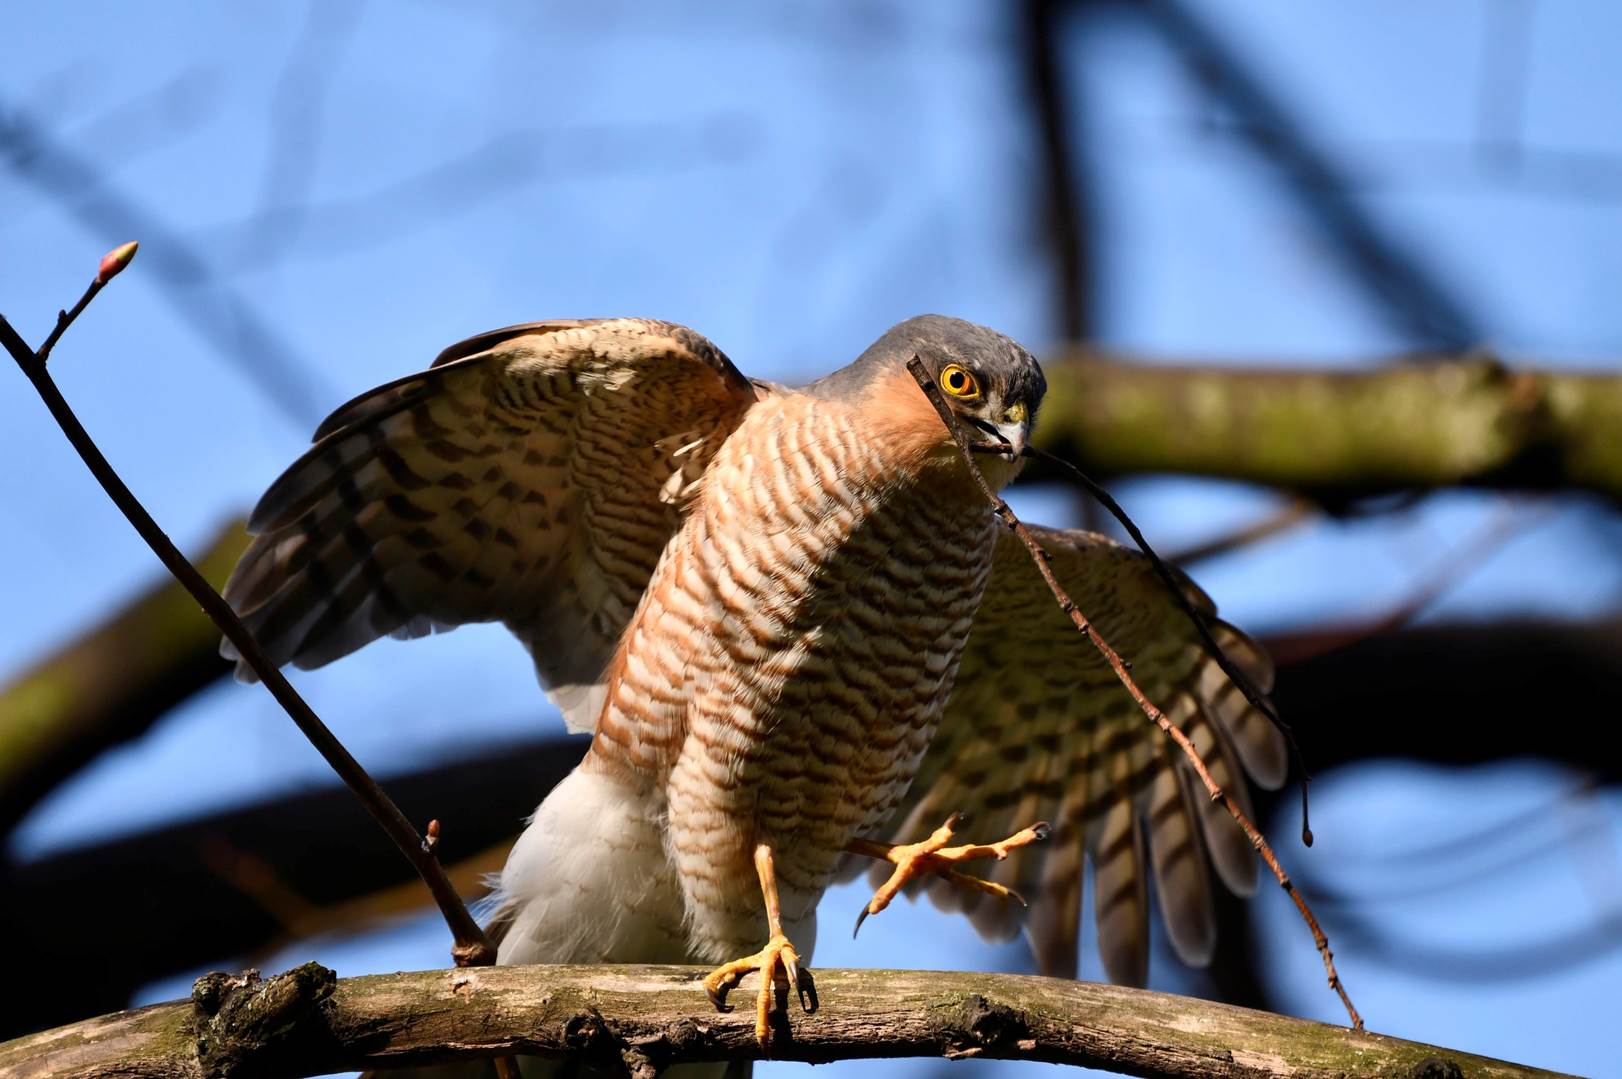 A hawk perched on a tree branch

Description automatically generated